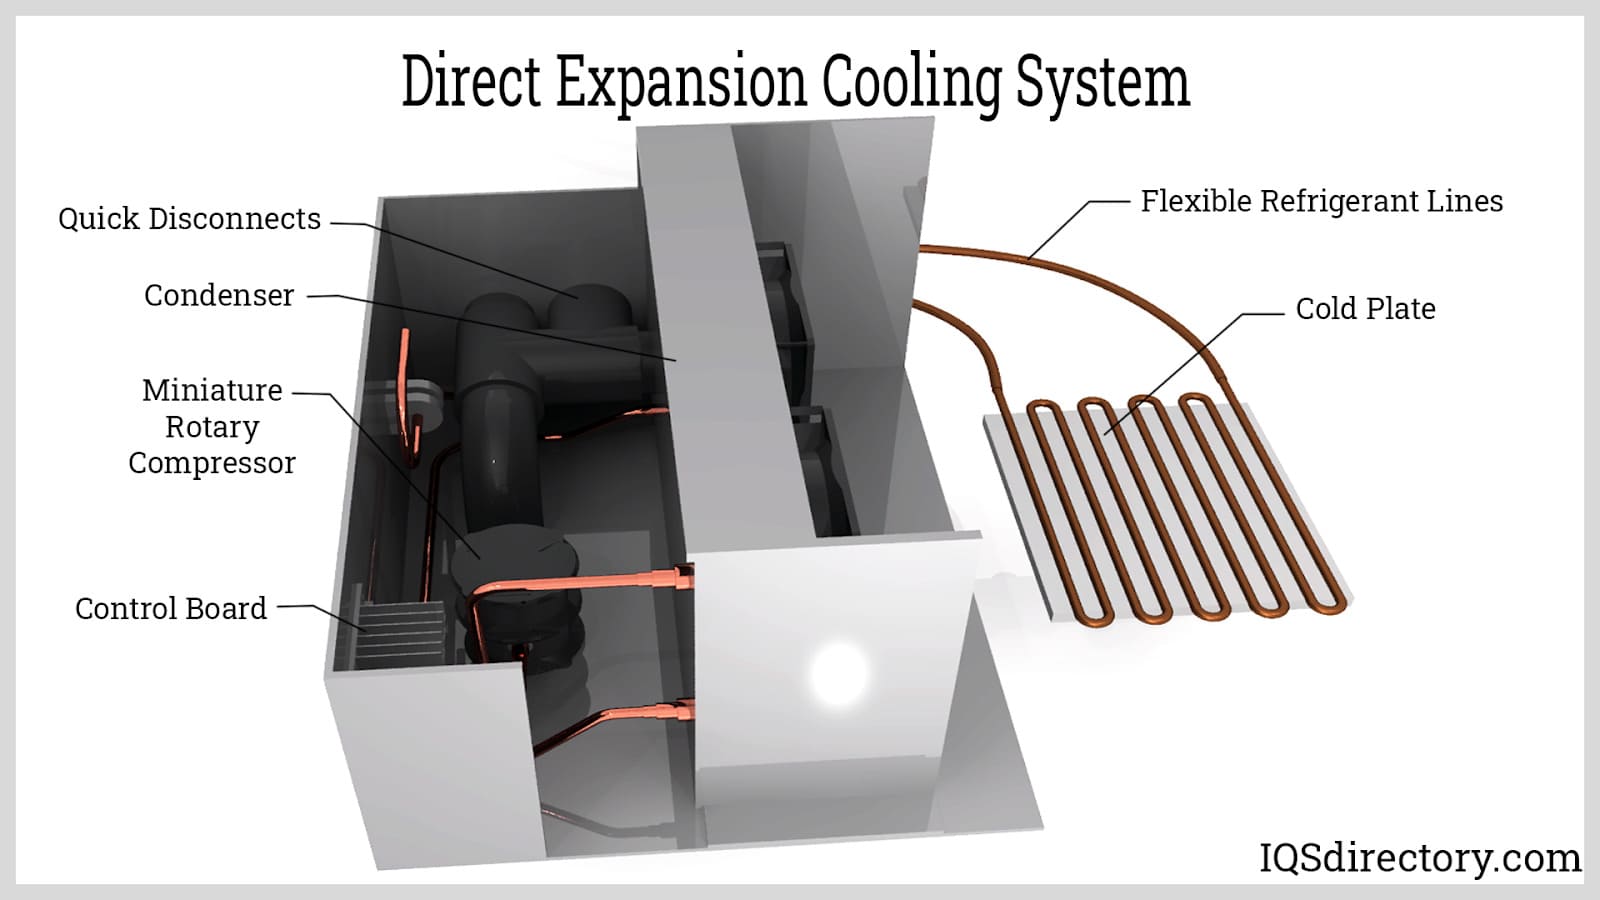 Direct Expansion Cooling System